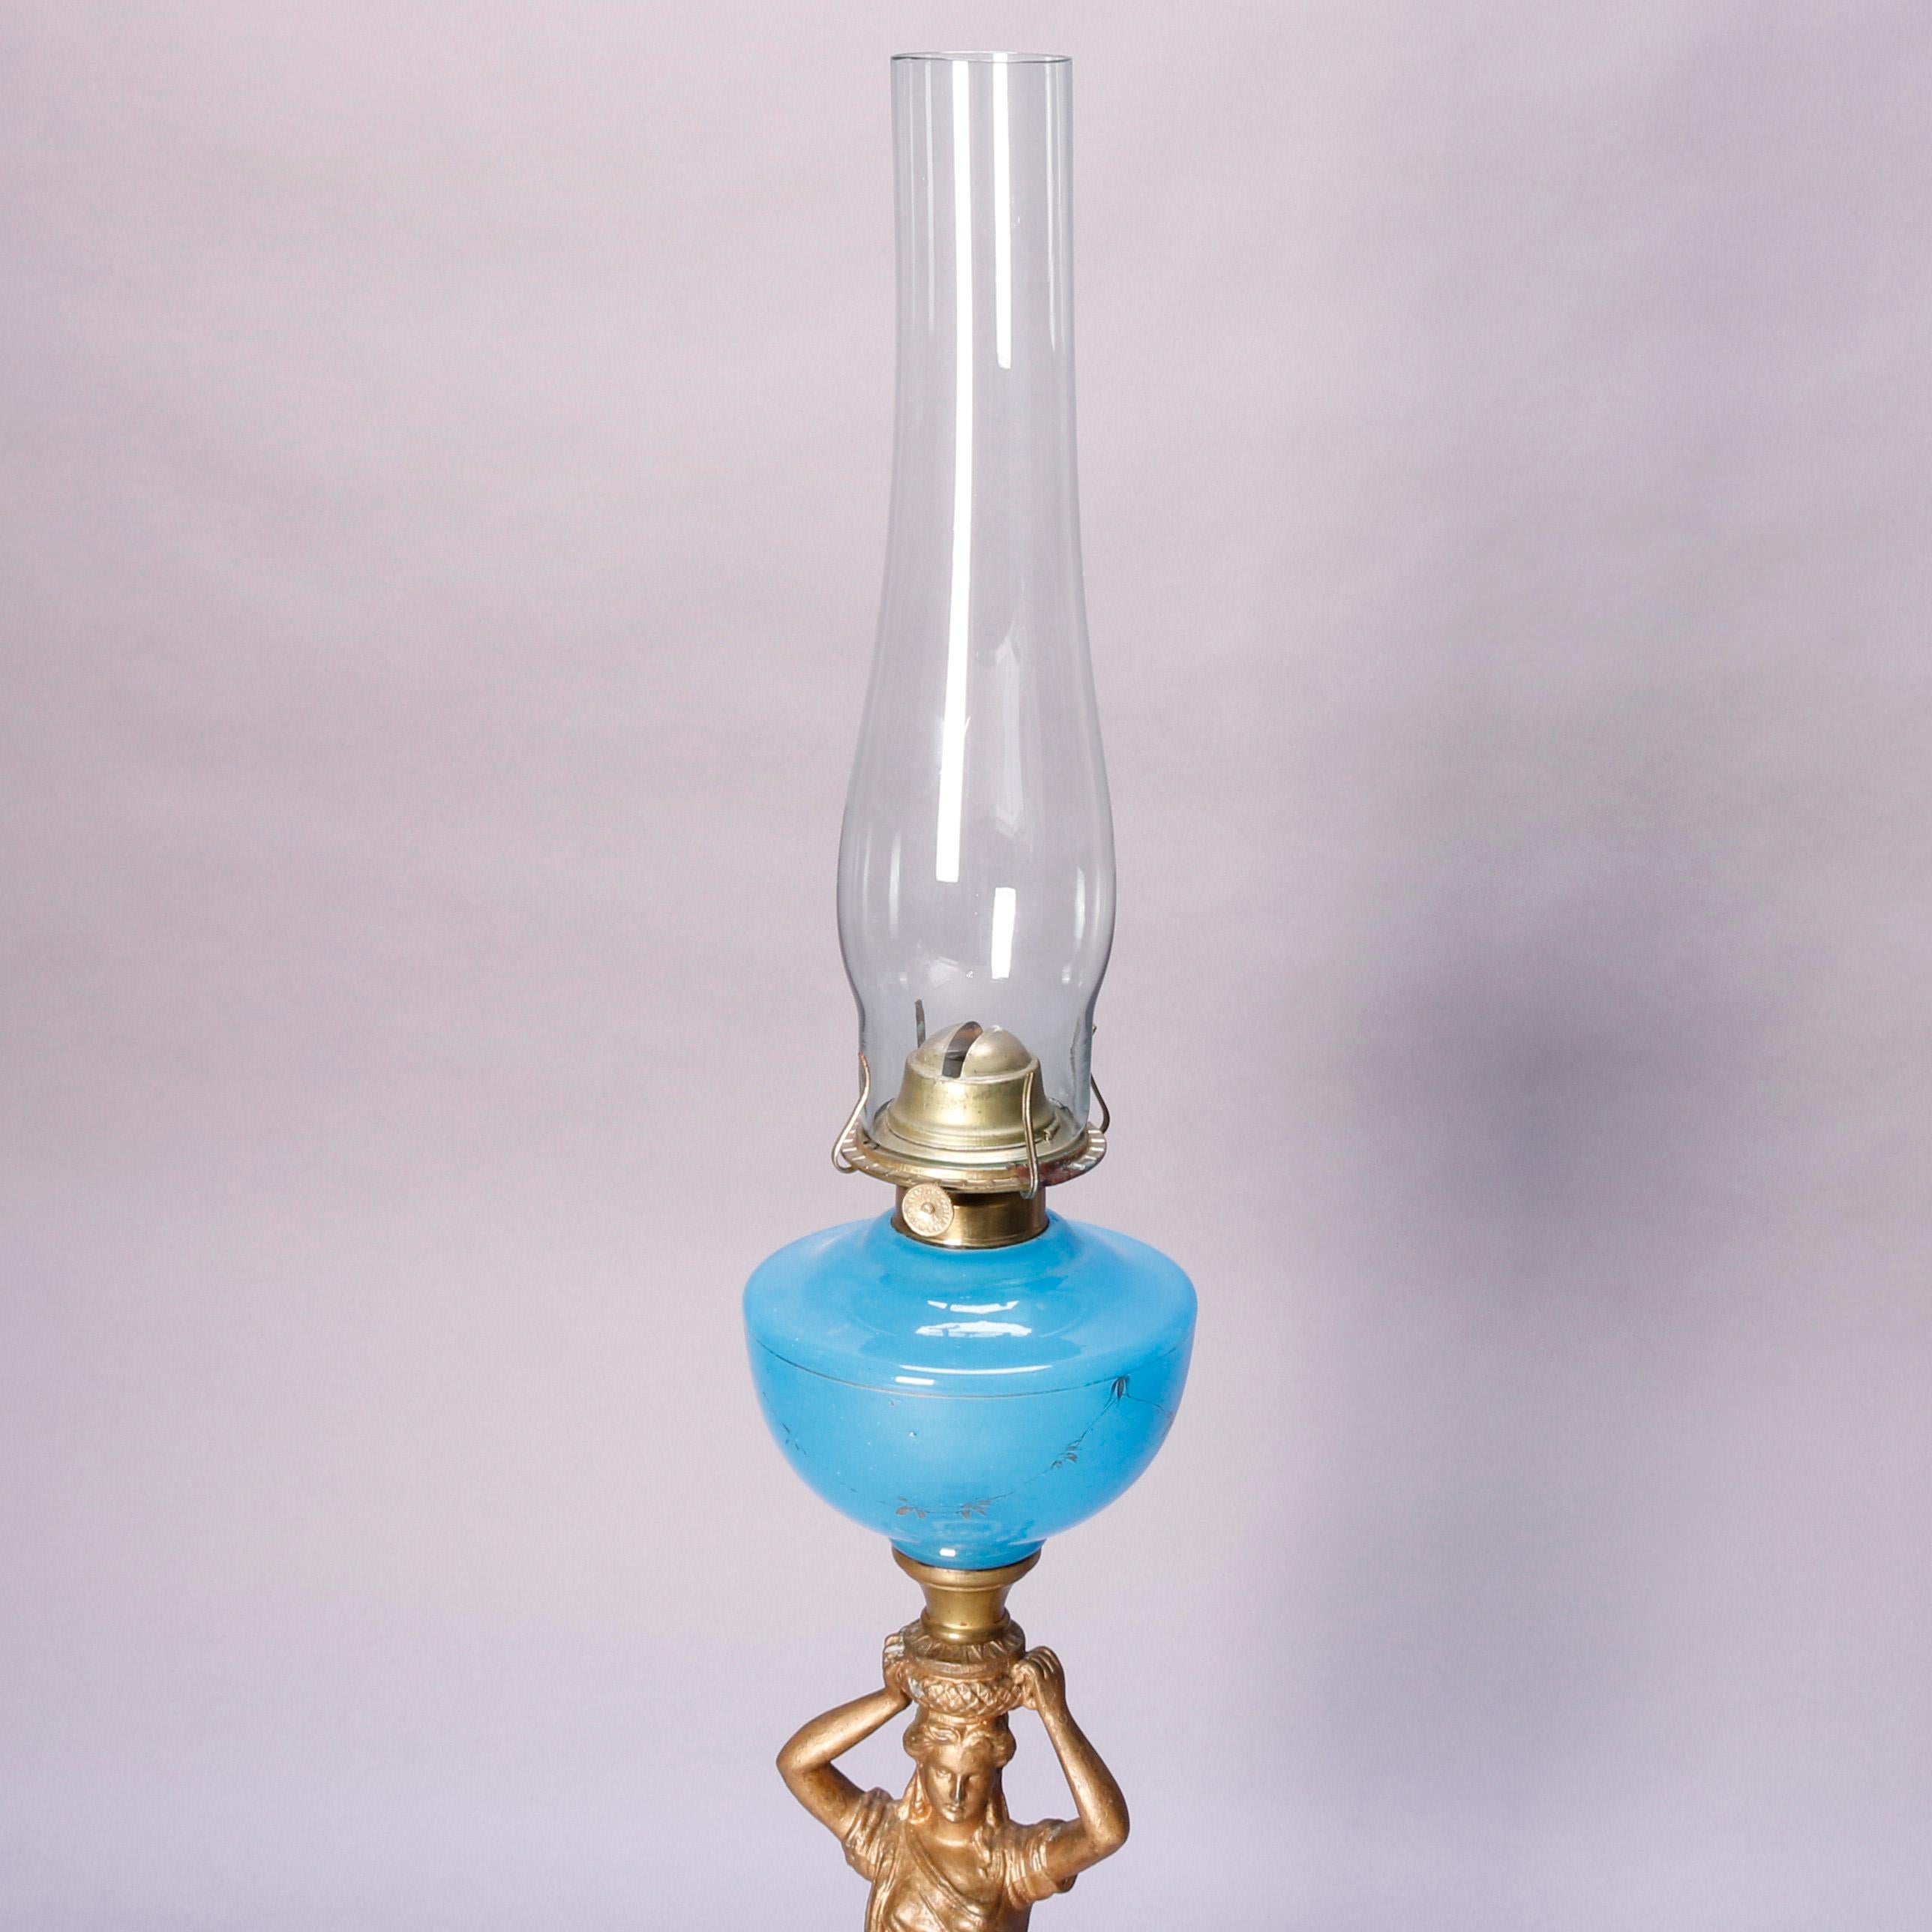 19th Century Antique Figural Bronze Gone with the Wind Gilt Art Glass Oil Lamp, circa 1890